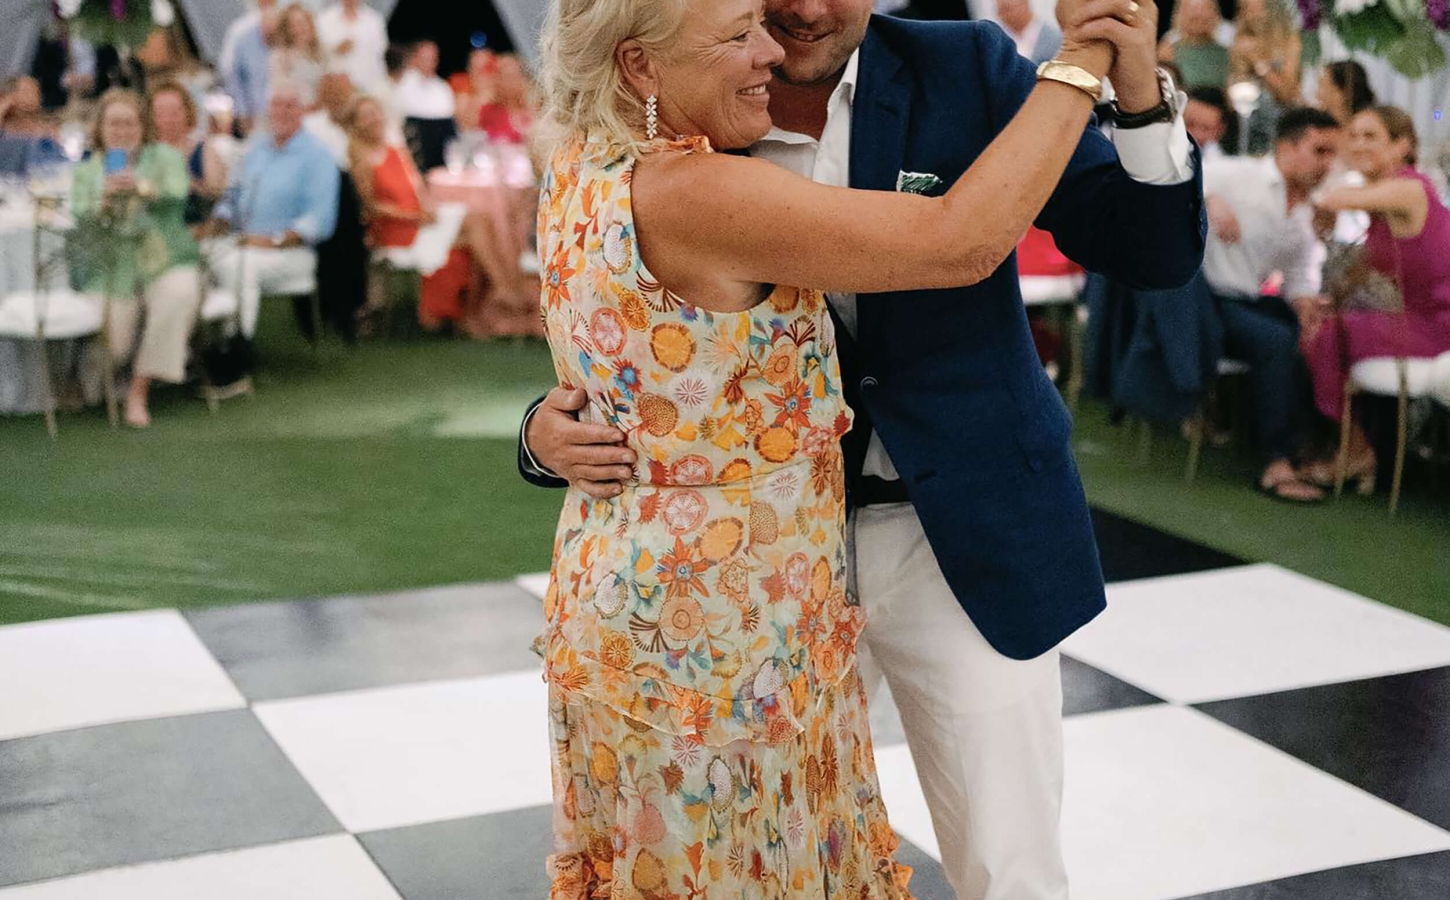 A couple dancing at an event in The Abaco Club